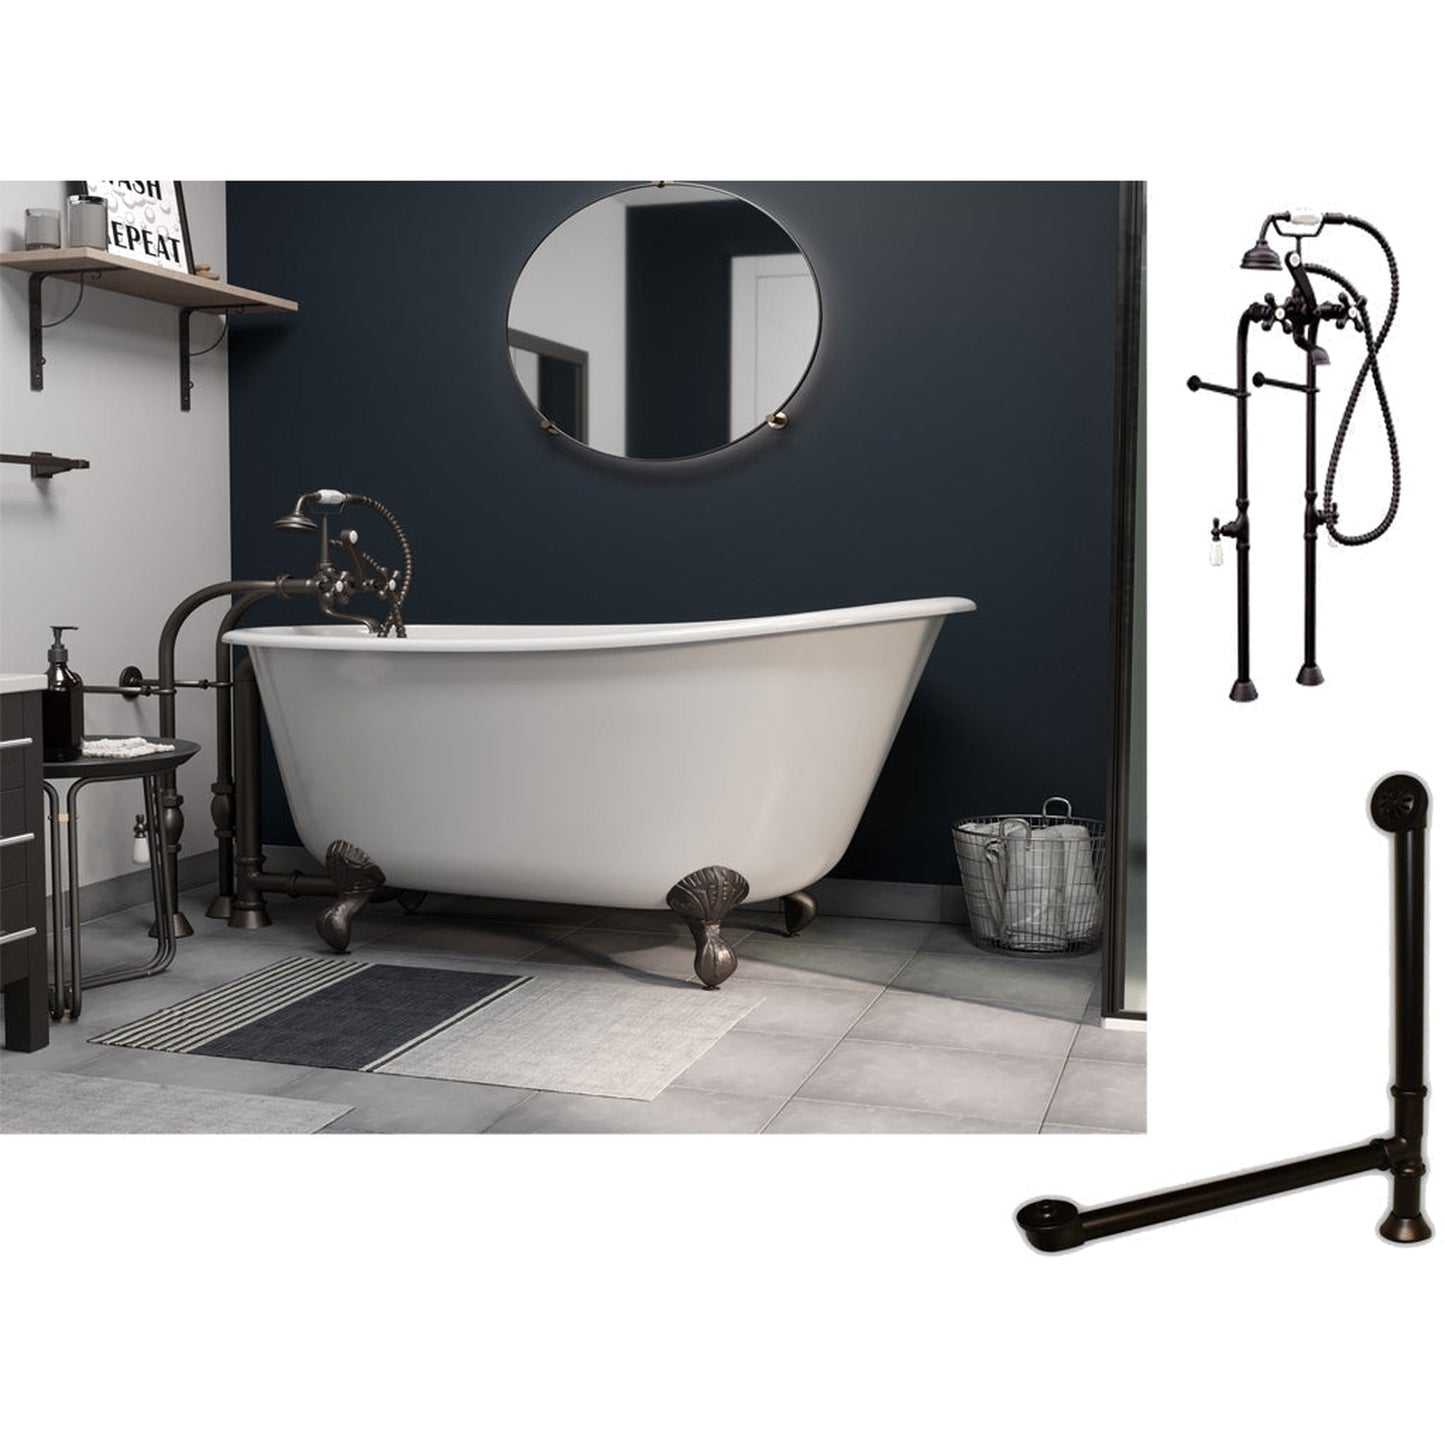 Cambridge Plumbing 58" White Cast Iron Swedish Single Slipper Clawfoot Bathtub With No Deck Holes And Complete Plumbing Package Including Modern Floor Mounted British Telephone Faucet, Drain And Overflow Assembly In Oil Rubbed Bronze